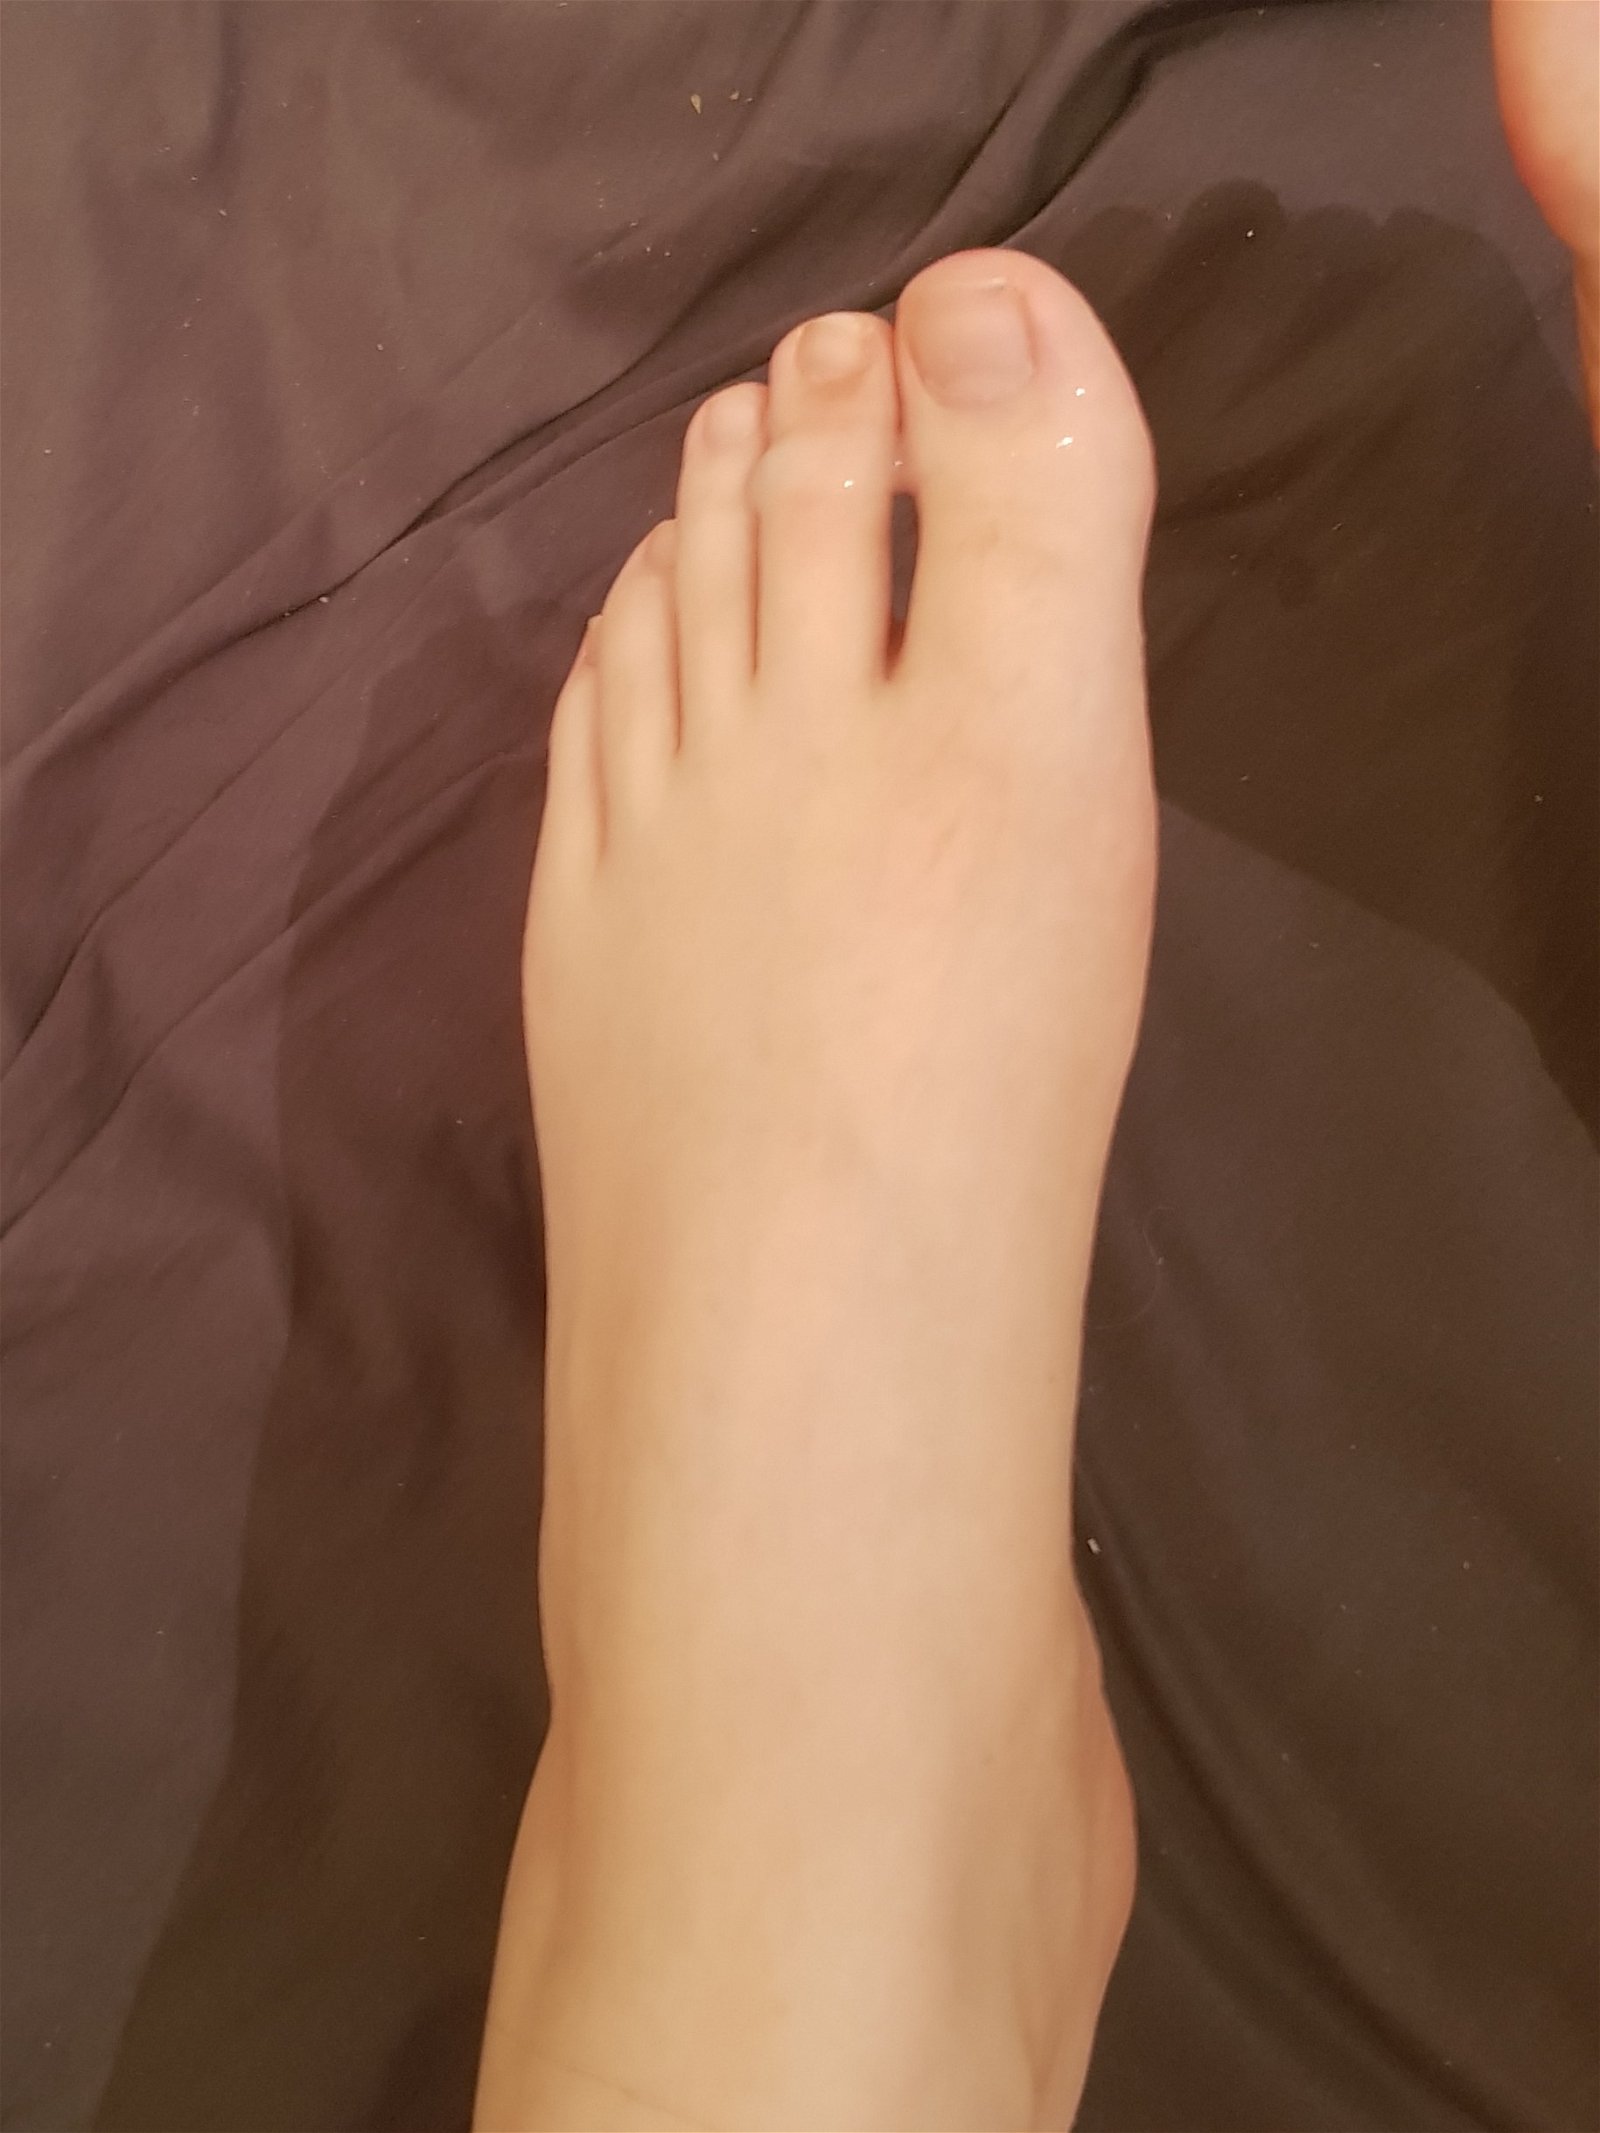 Photo by kawaiikitty42 with the username @kawaiikitty42, who is a star user,  July 4, 2020 at 12:24 AM. The post is about the topic Foot Worship and the text says 'My pretty little foot all covered in cum 💦
See more on my onlyfans'